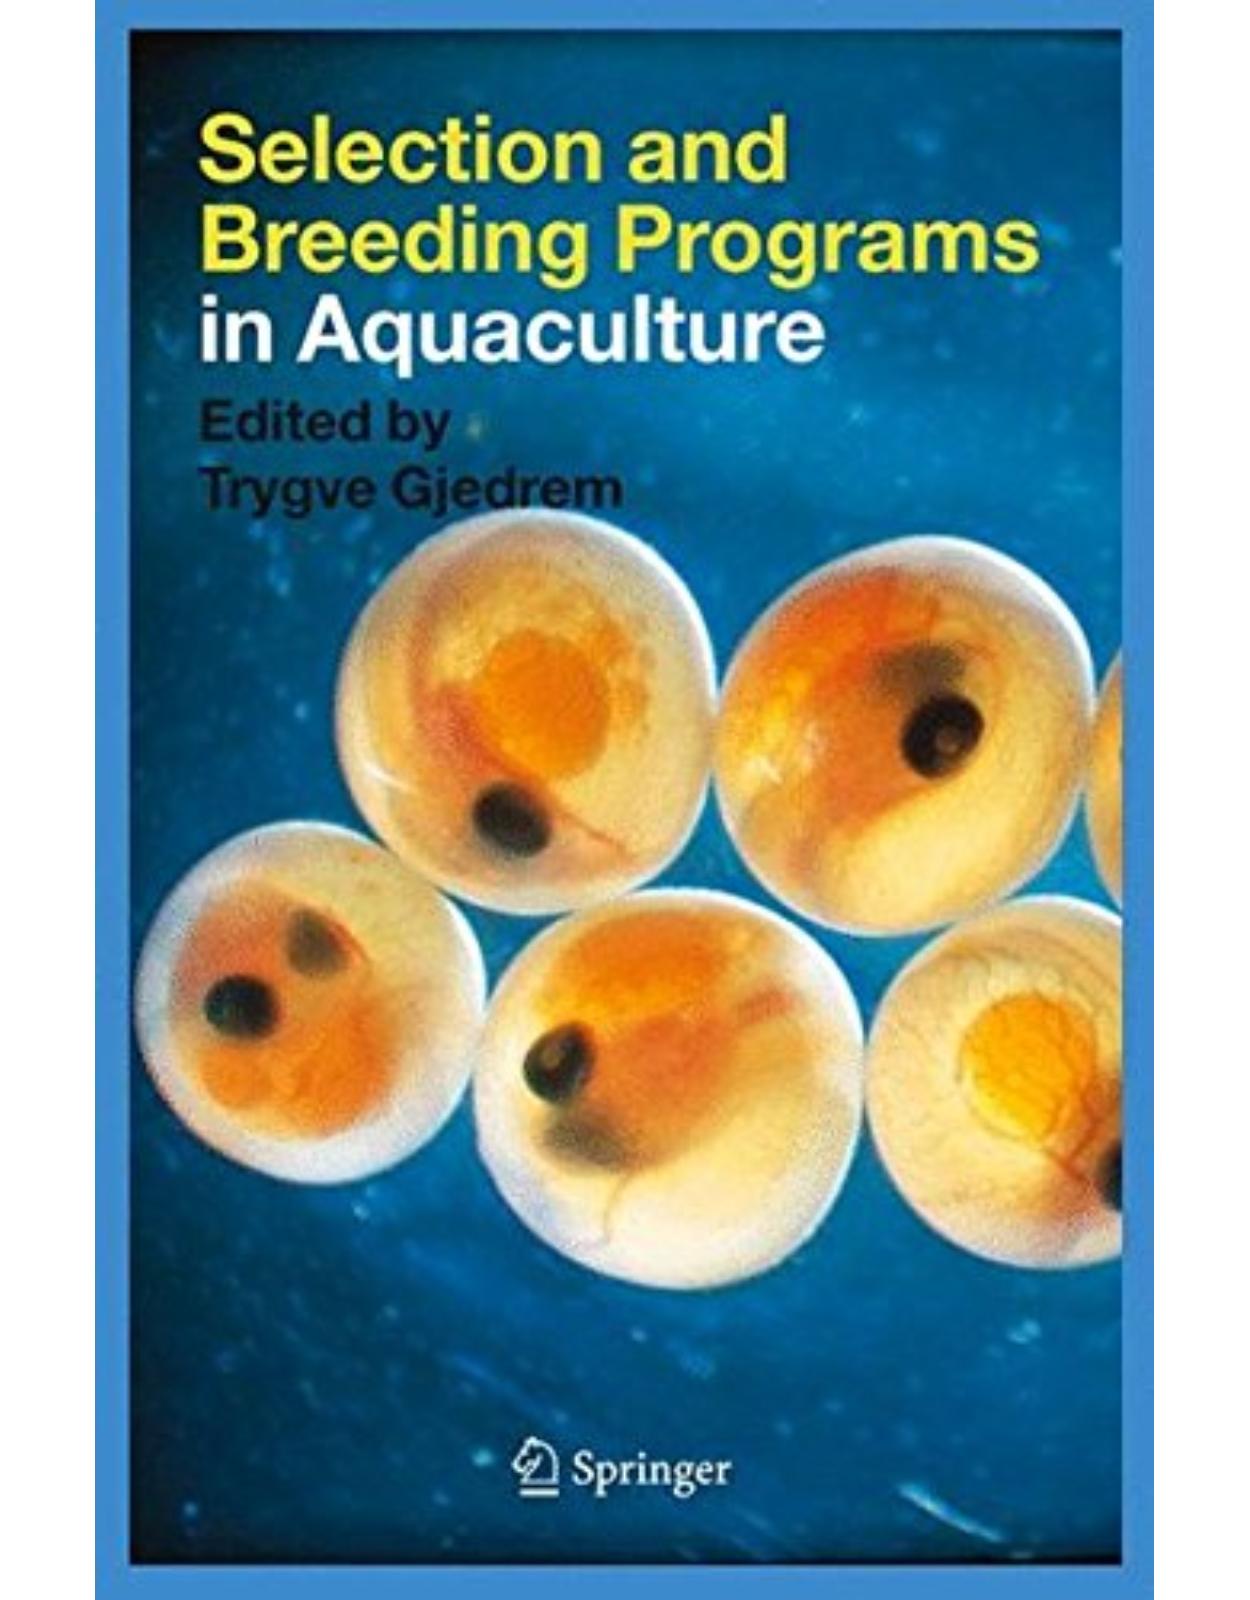 Selection and Breeding Programs in Aquaculture